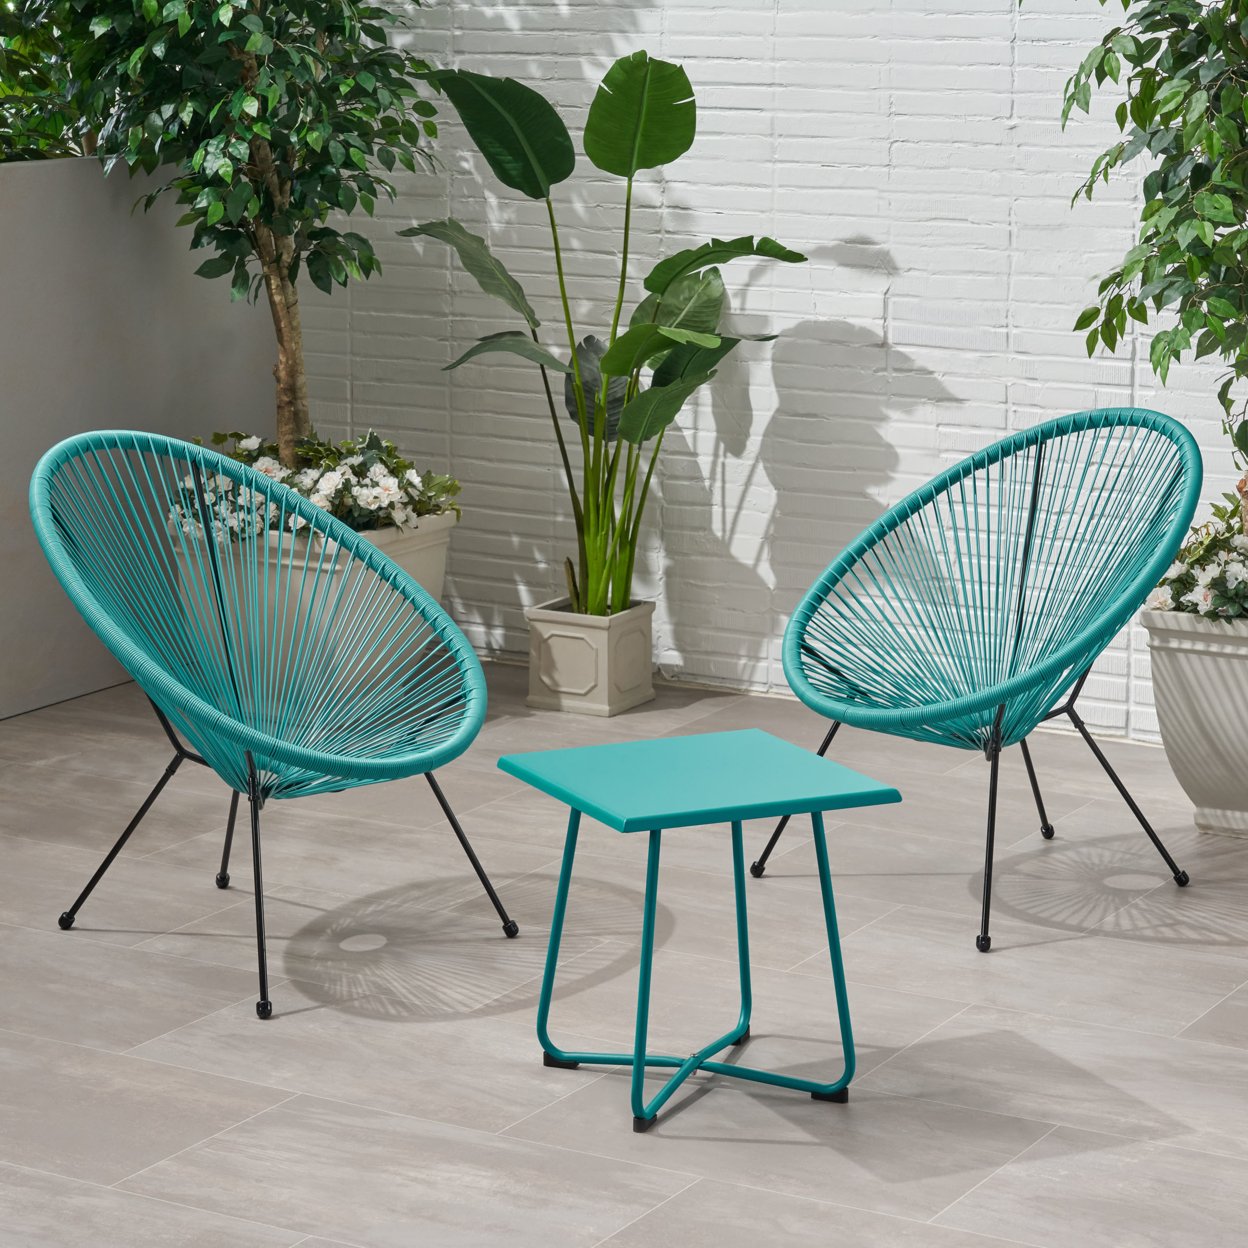 Alexis Outdoor Woven 3 Piece Chat Set - Teal + Black